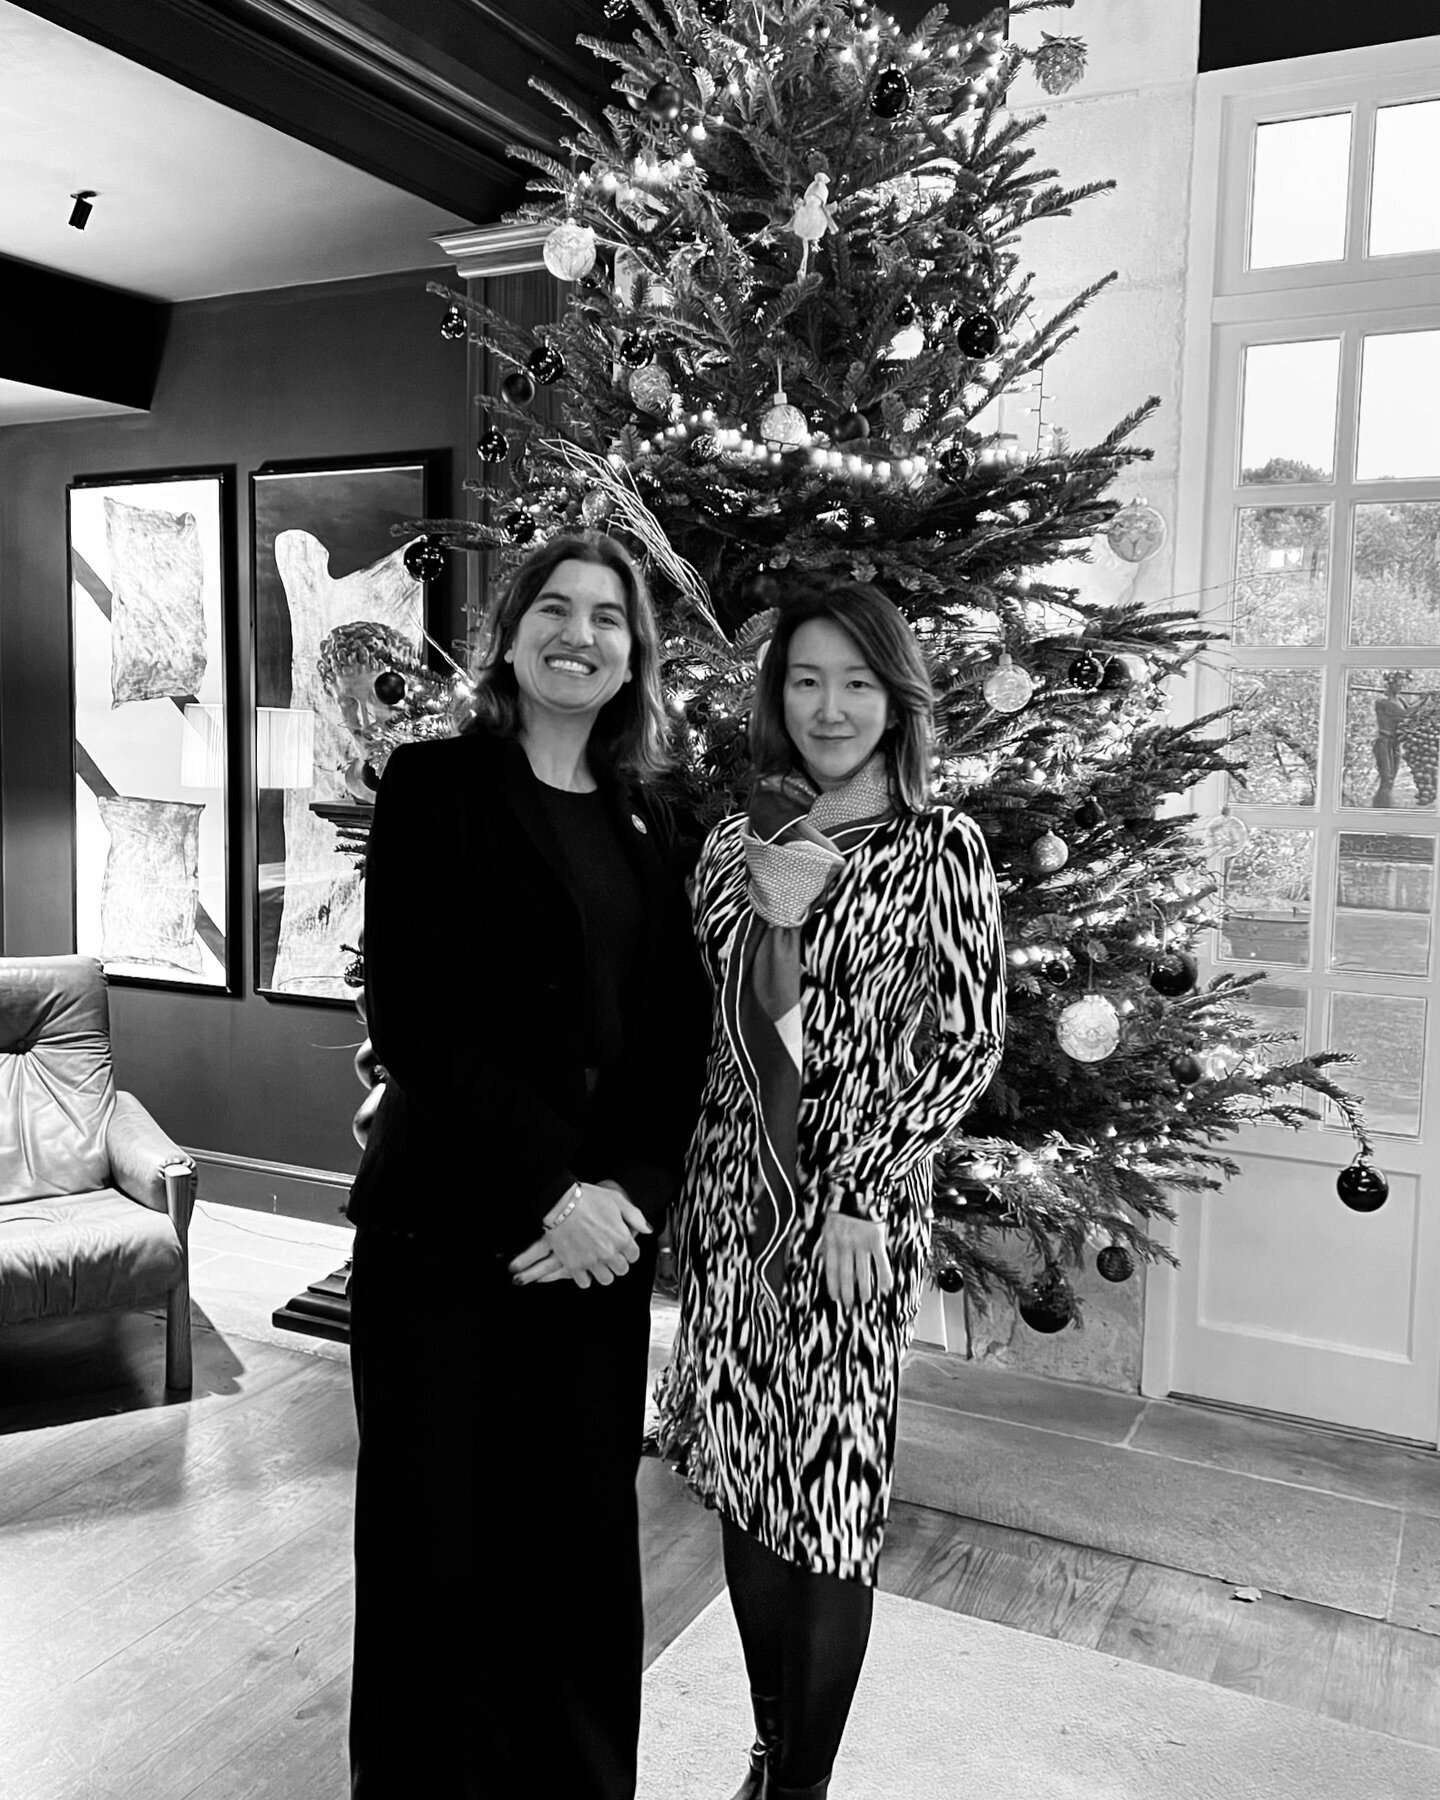 With Alice, the owner of the hotel Caudalie next to Chateau Smith Haut Lafitte.
A wonderful hotel and beautiful atmosphere filled with X mas spirit this time of the year 💕🍾
#요즘와서더느끼는 것
친구도 고용인도 연인도 비지니스 상대도 엄선할 필요가 있다
싫은 건 일초도 망설임없이 떠나야 맞다
사람이든 장소든